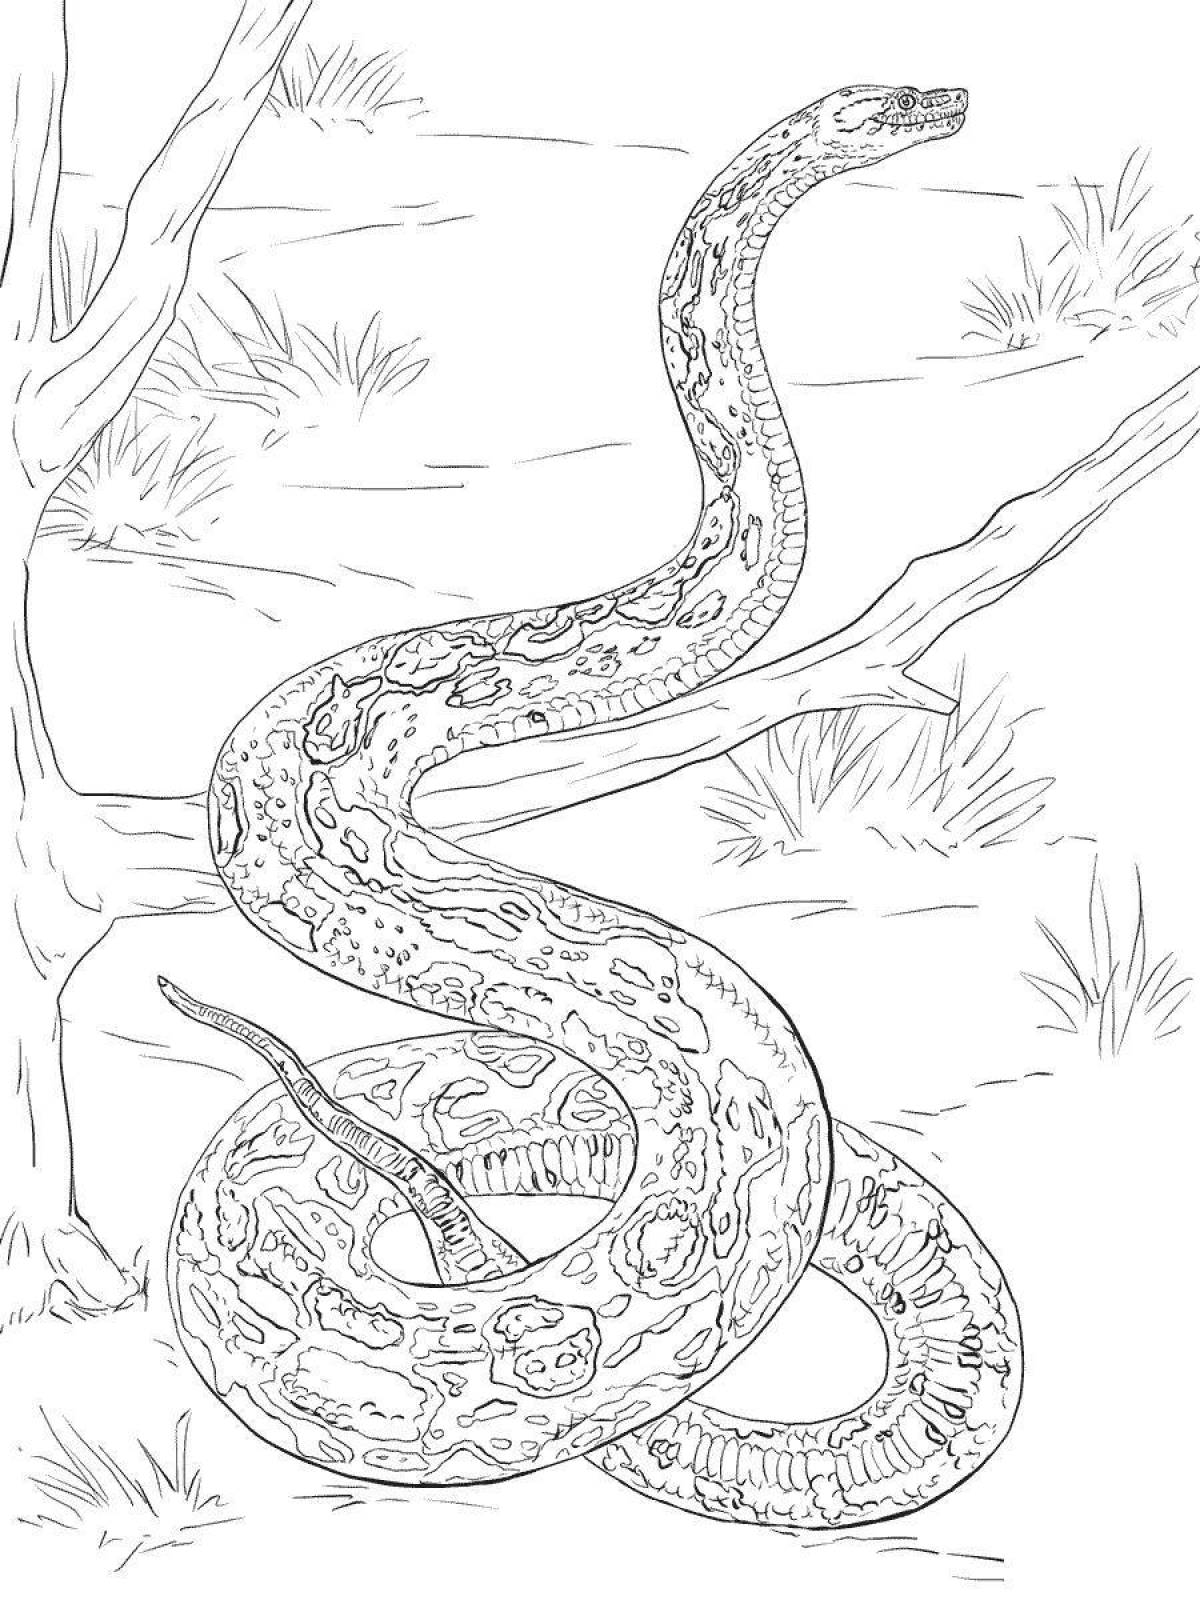 Coloring bright snake by numbers